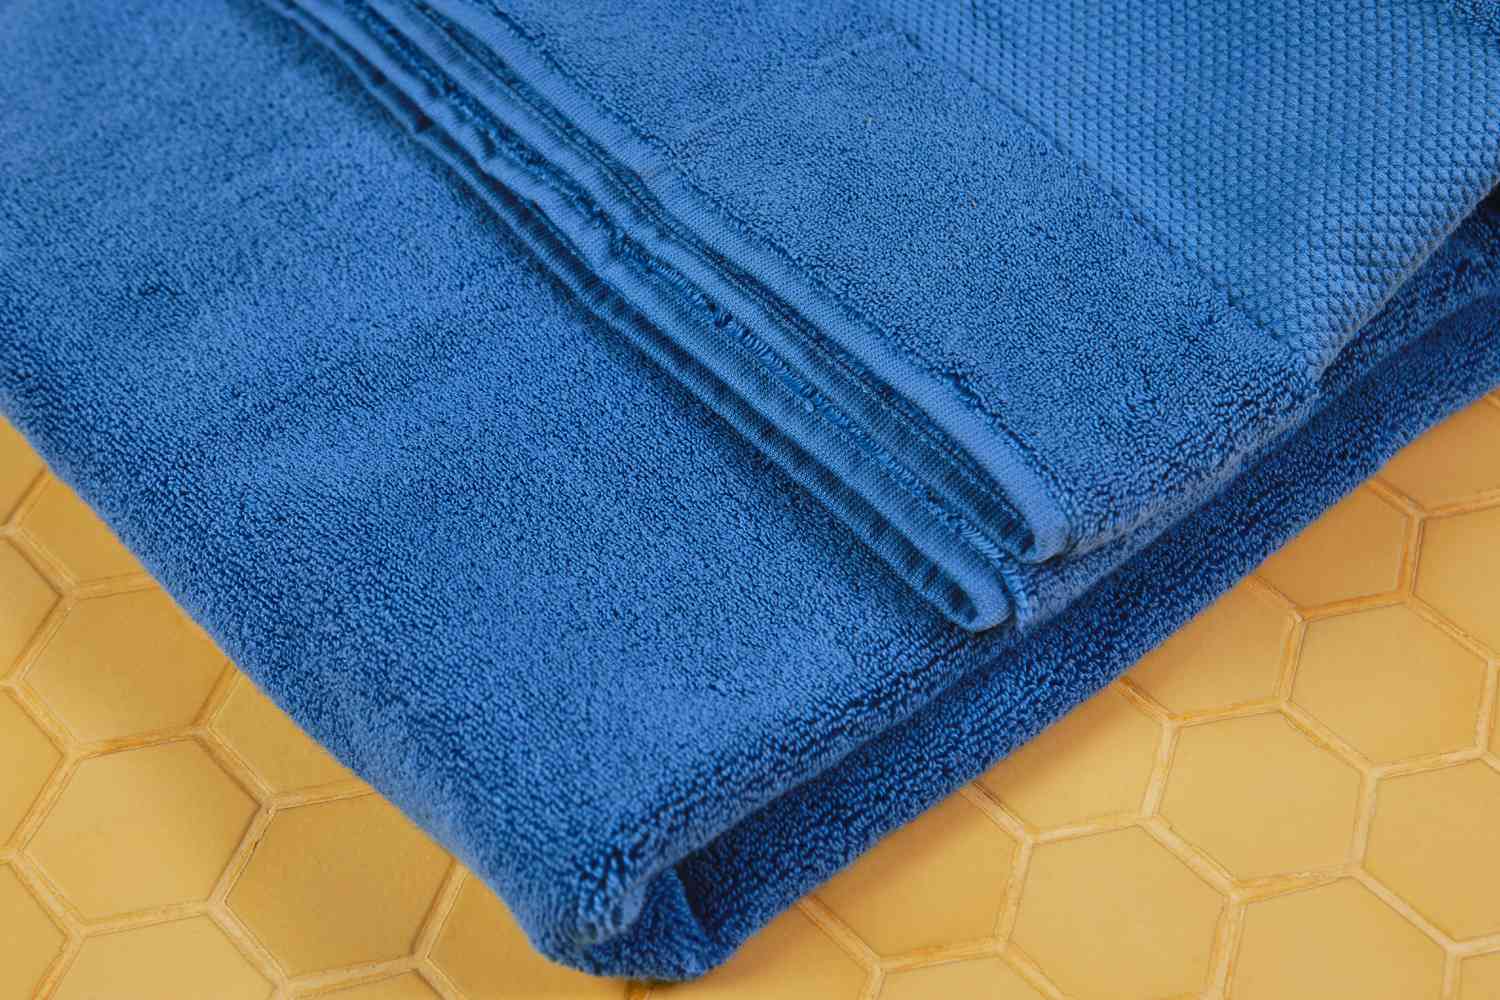 Closeup of Frontgate Resort Collection Bath Towel on yellow tile surface